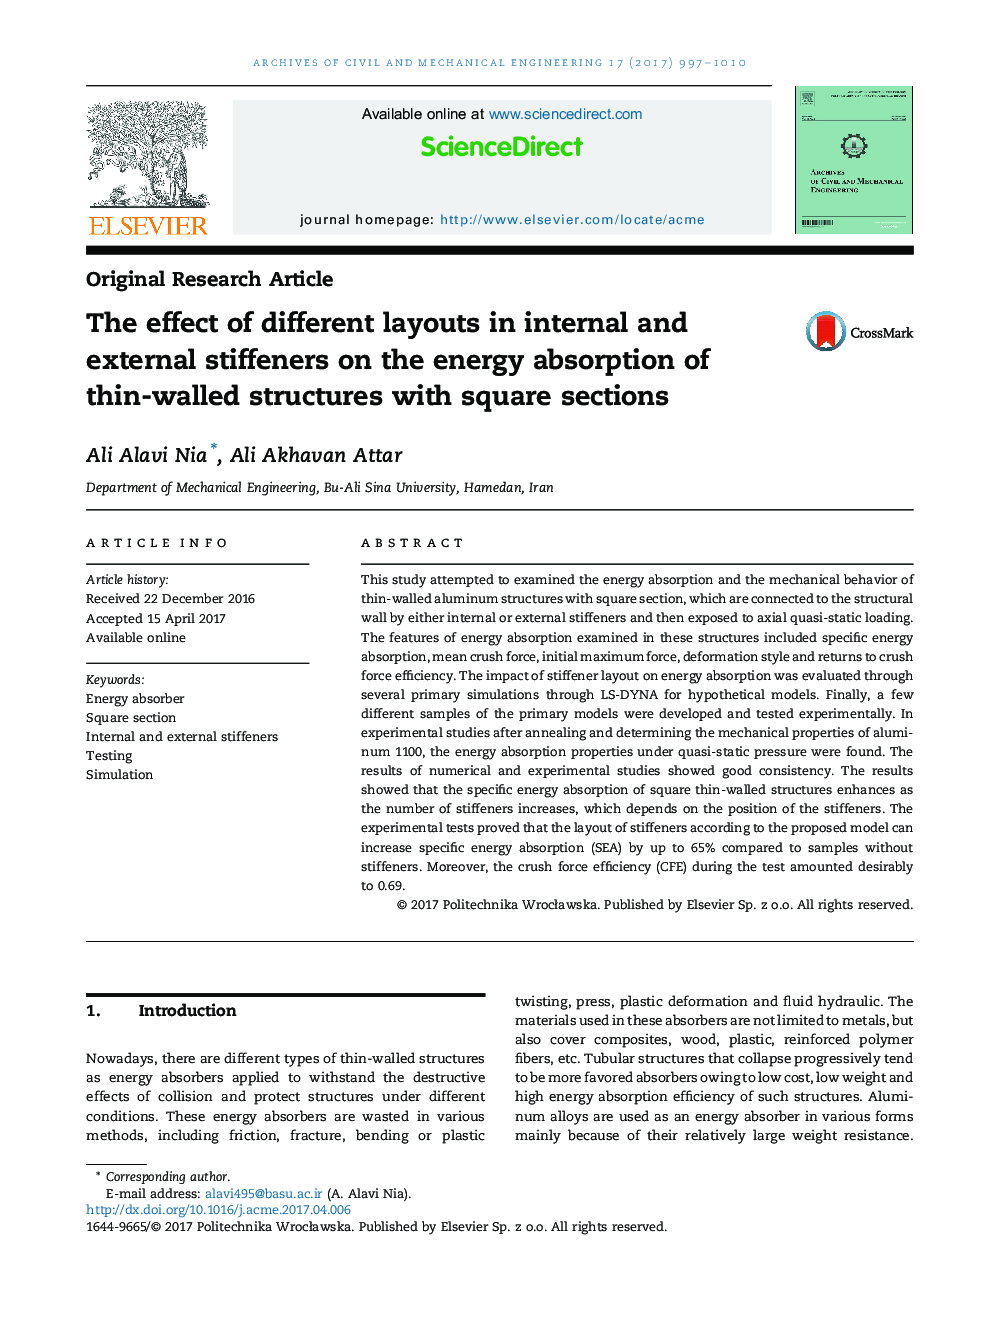 The effect of different layouts in internal and external stiffeners on the energy absorption of thin-walled structures with square sections